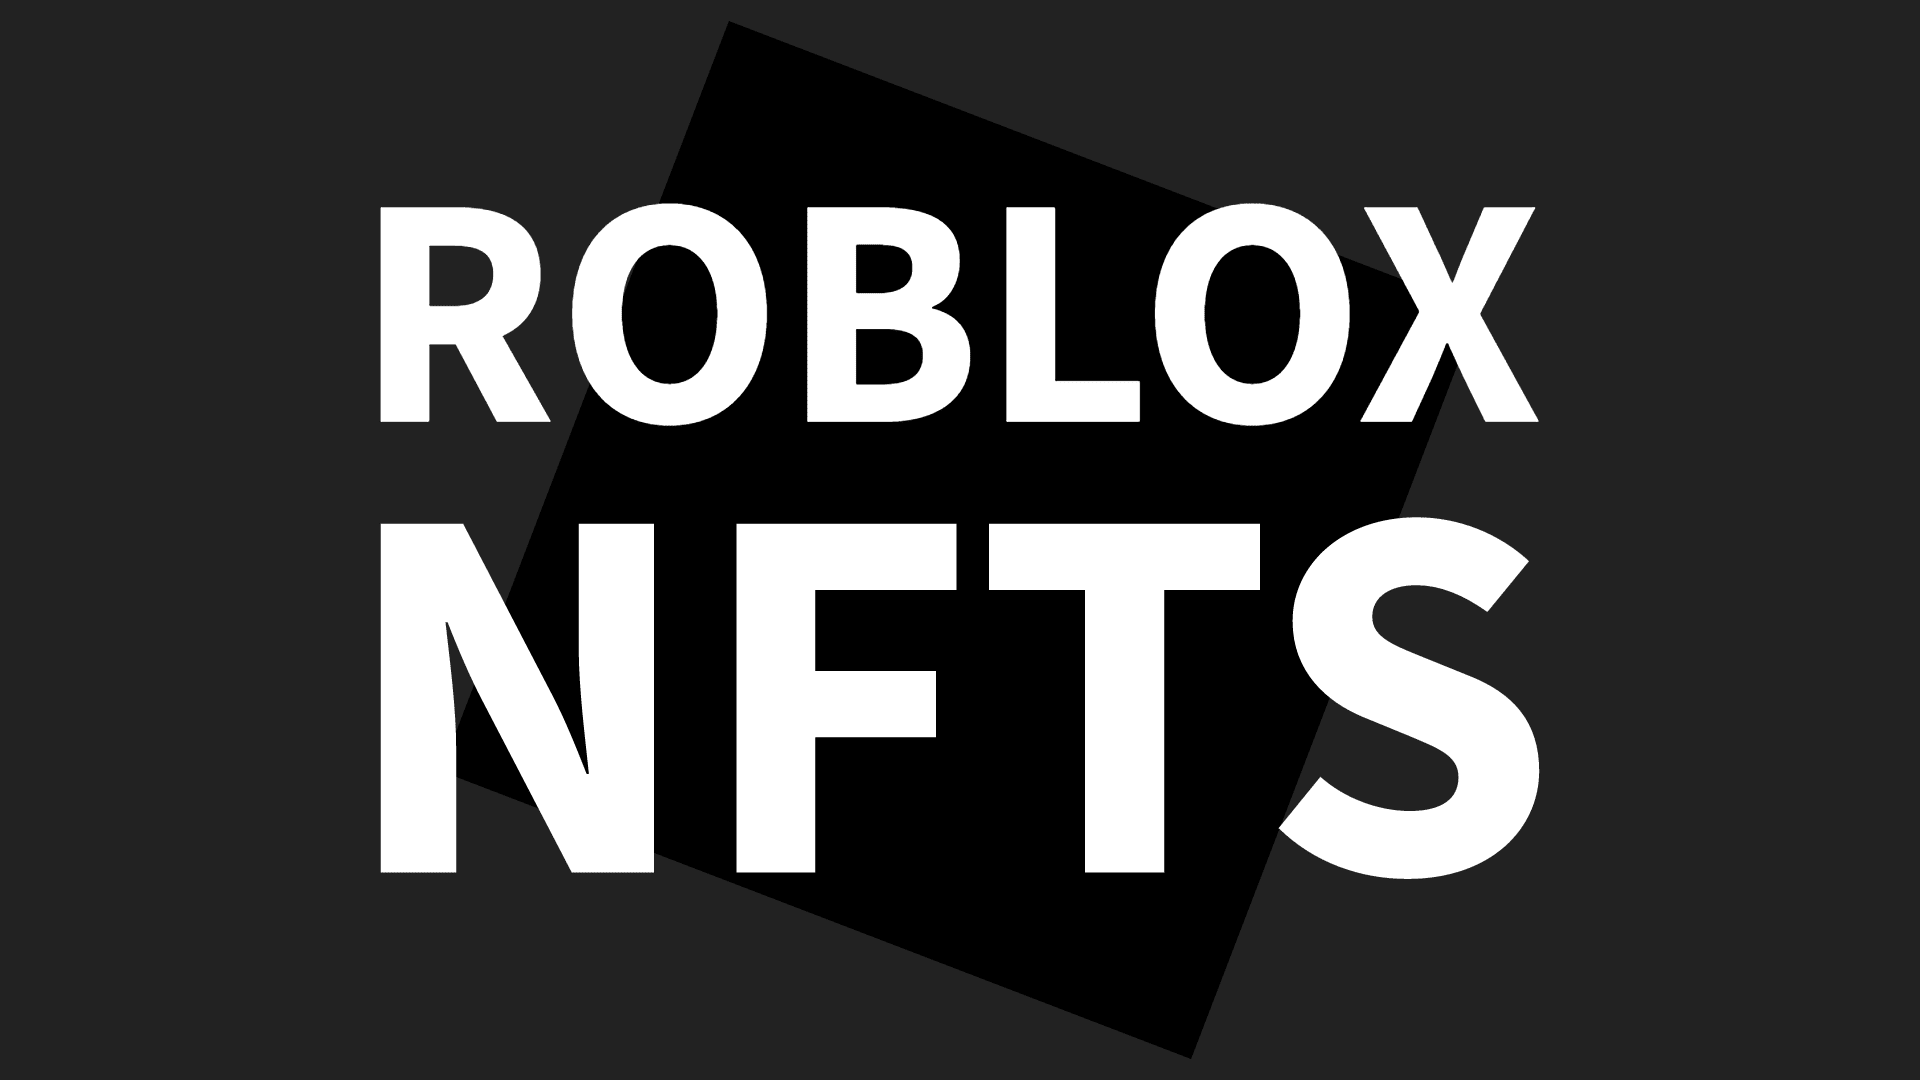 Roblox is Looking into NFT and Web3 Integrations After Q3 Earnings